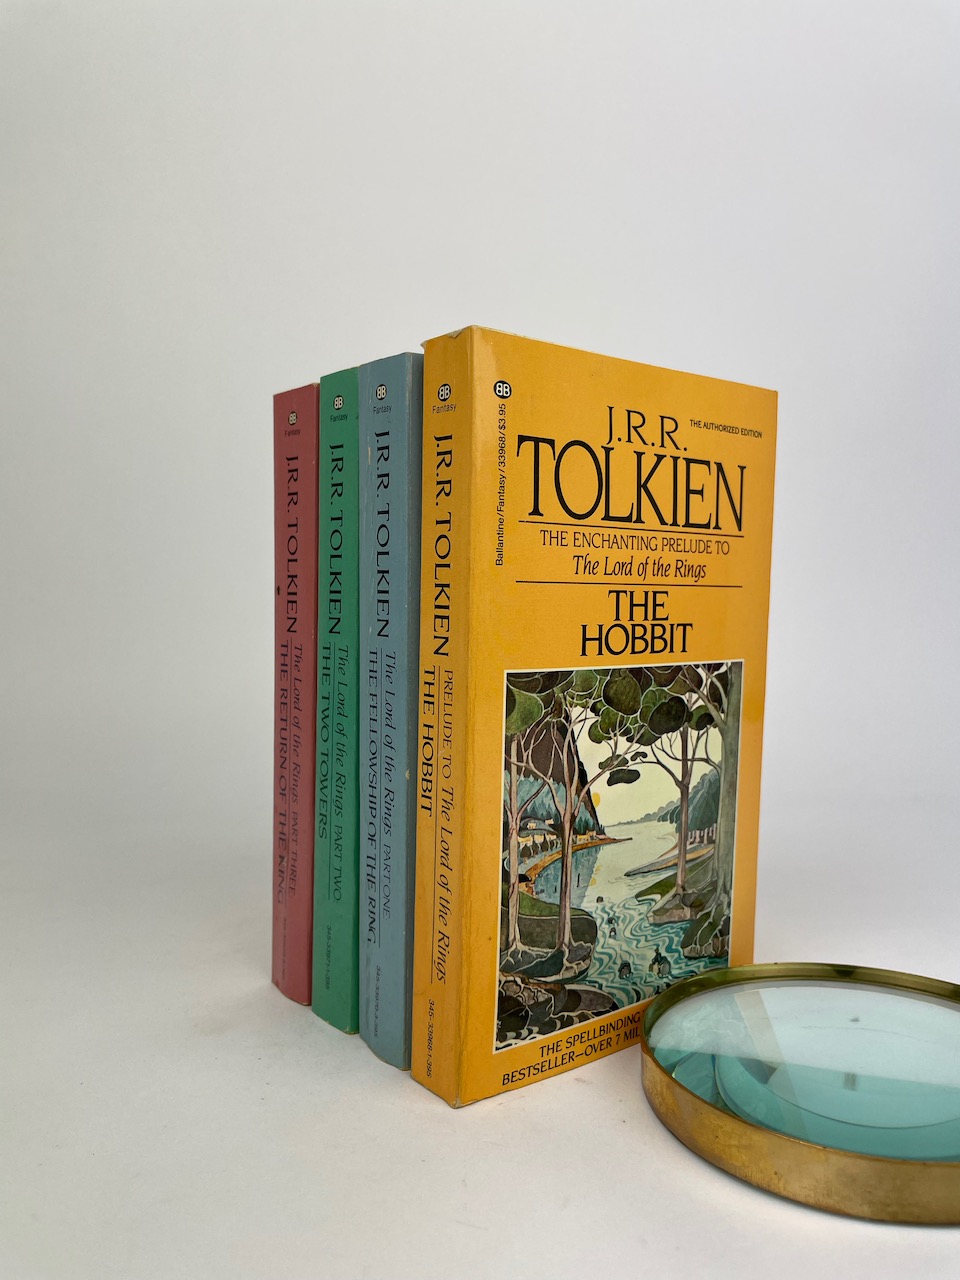 The Hobbit and The Lord of the Rings, Four Paperback Book Boxset from 1986, Blue Slipcase art by J.R.R. Tolkien 10